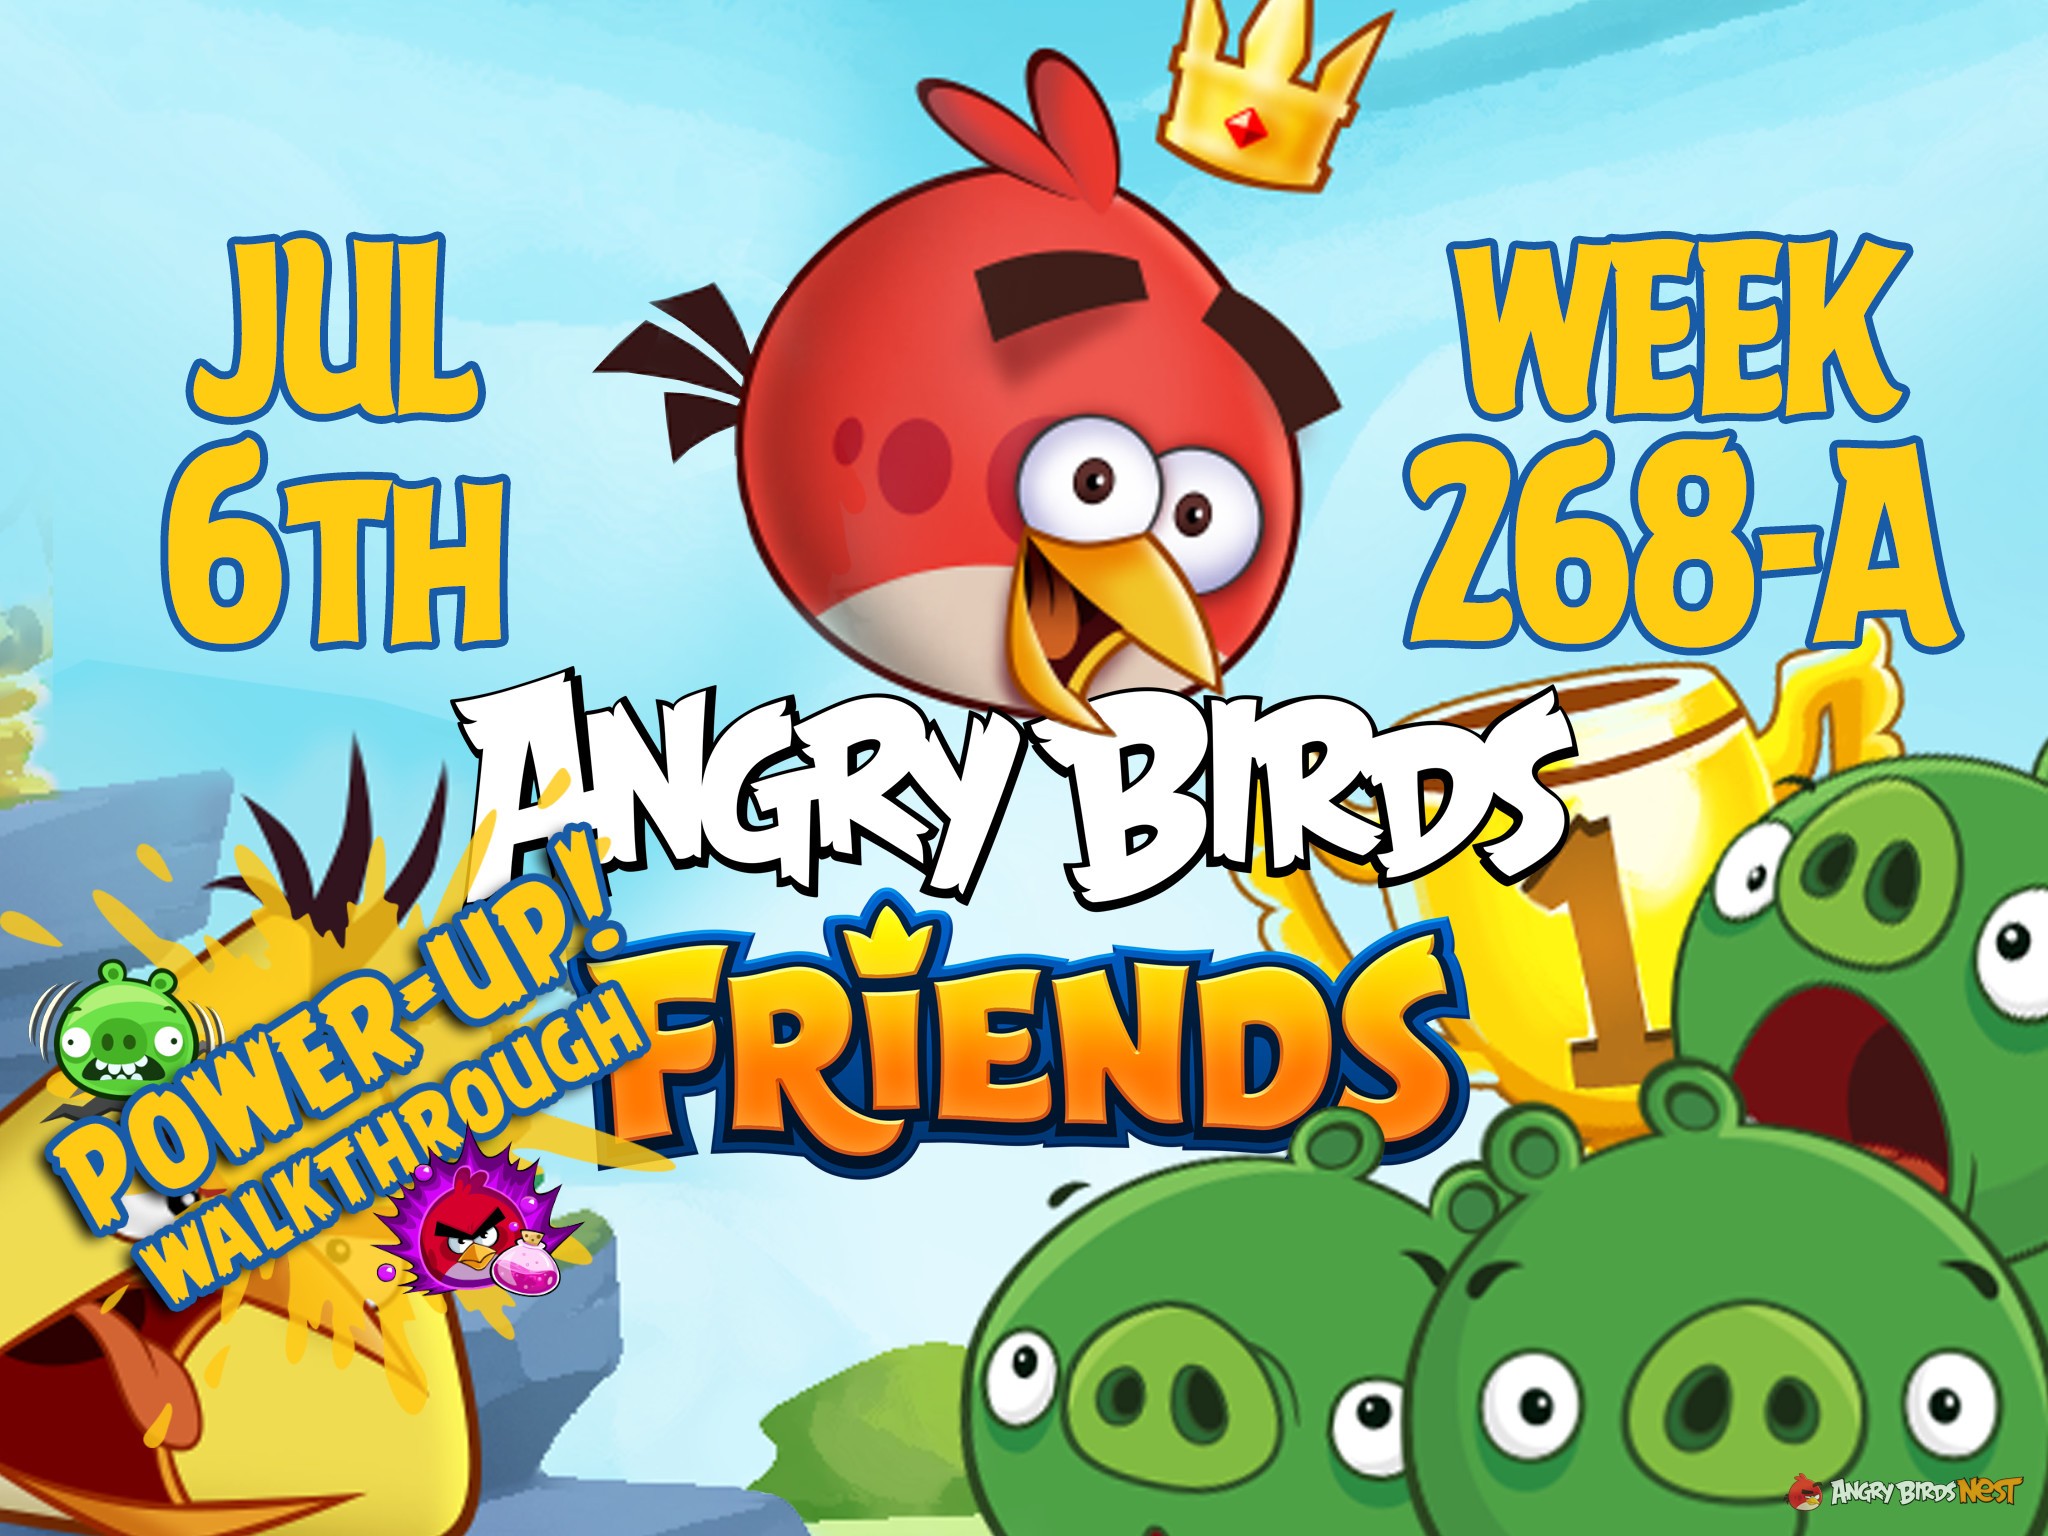 Angry Birds Friends Tournament Week 268-A Feature Image PU